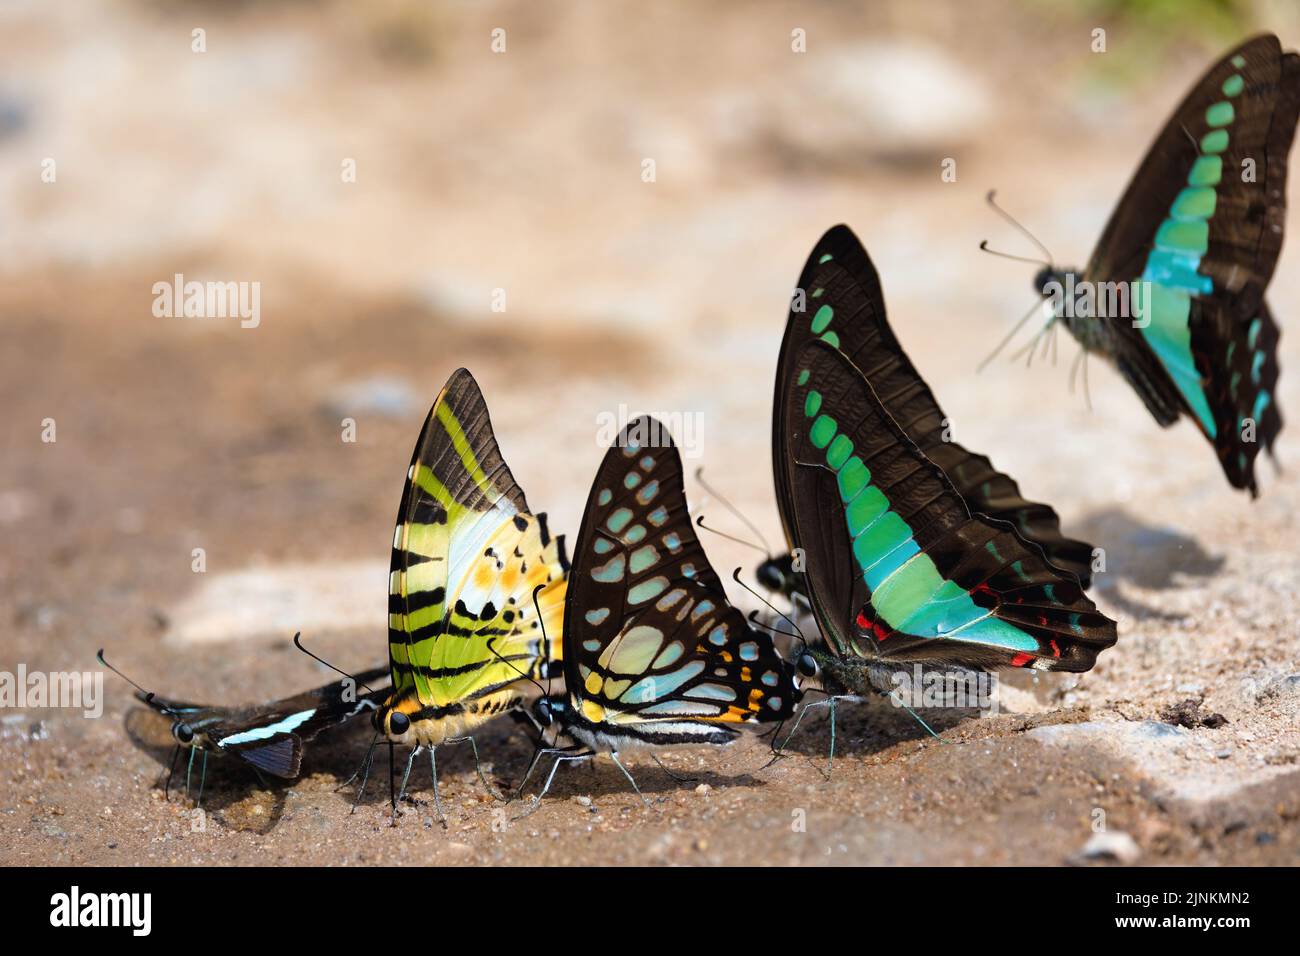 Different tropical swallowtail species drinking water on wet soil : Green Dragontail, Fivebar Swordtail,Veined Jay,Blue Triangle. North Thailand Stock Photo